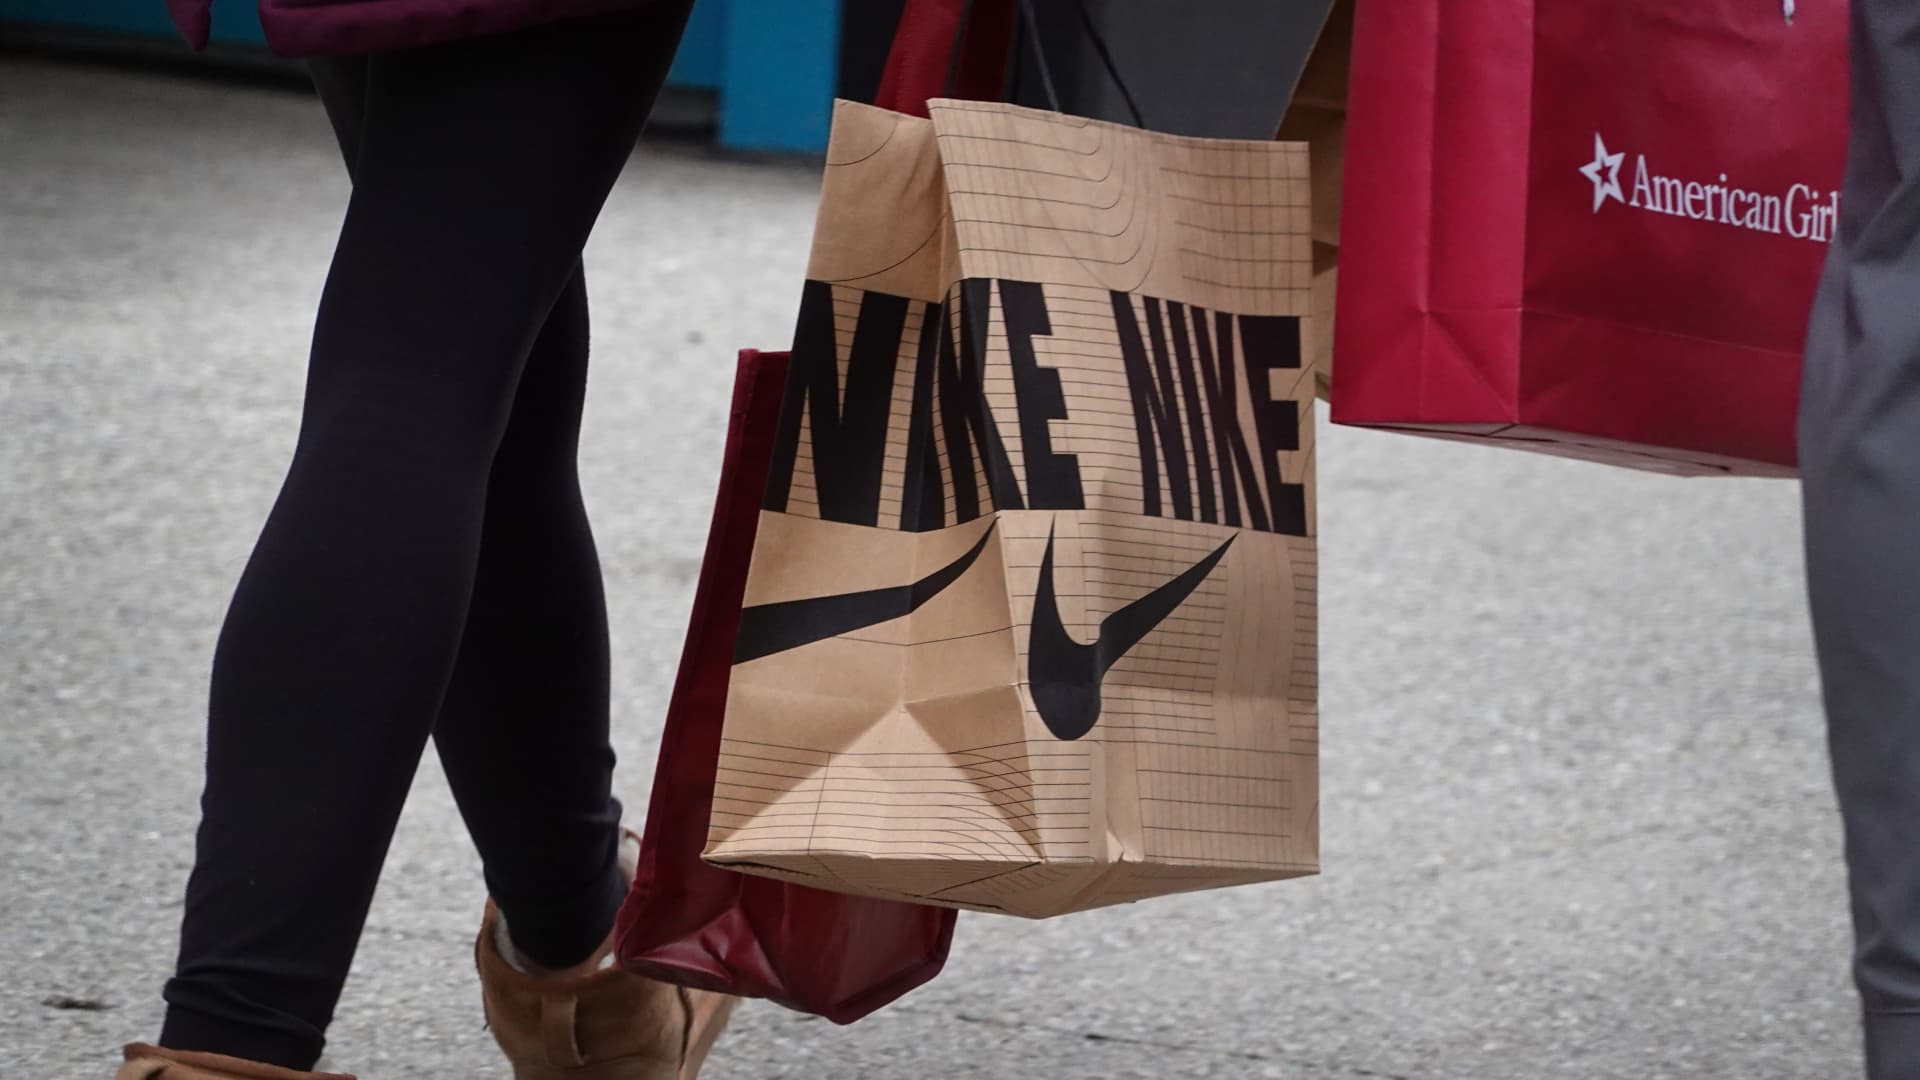 Nike, Foot Locker shares sink after athletic attire maker cuts income outlook